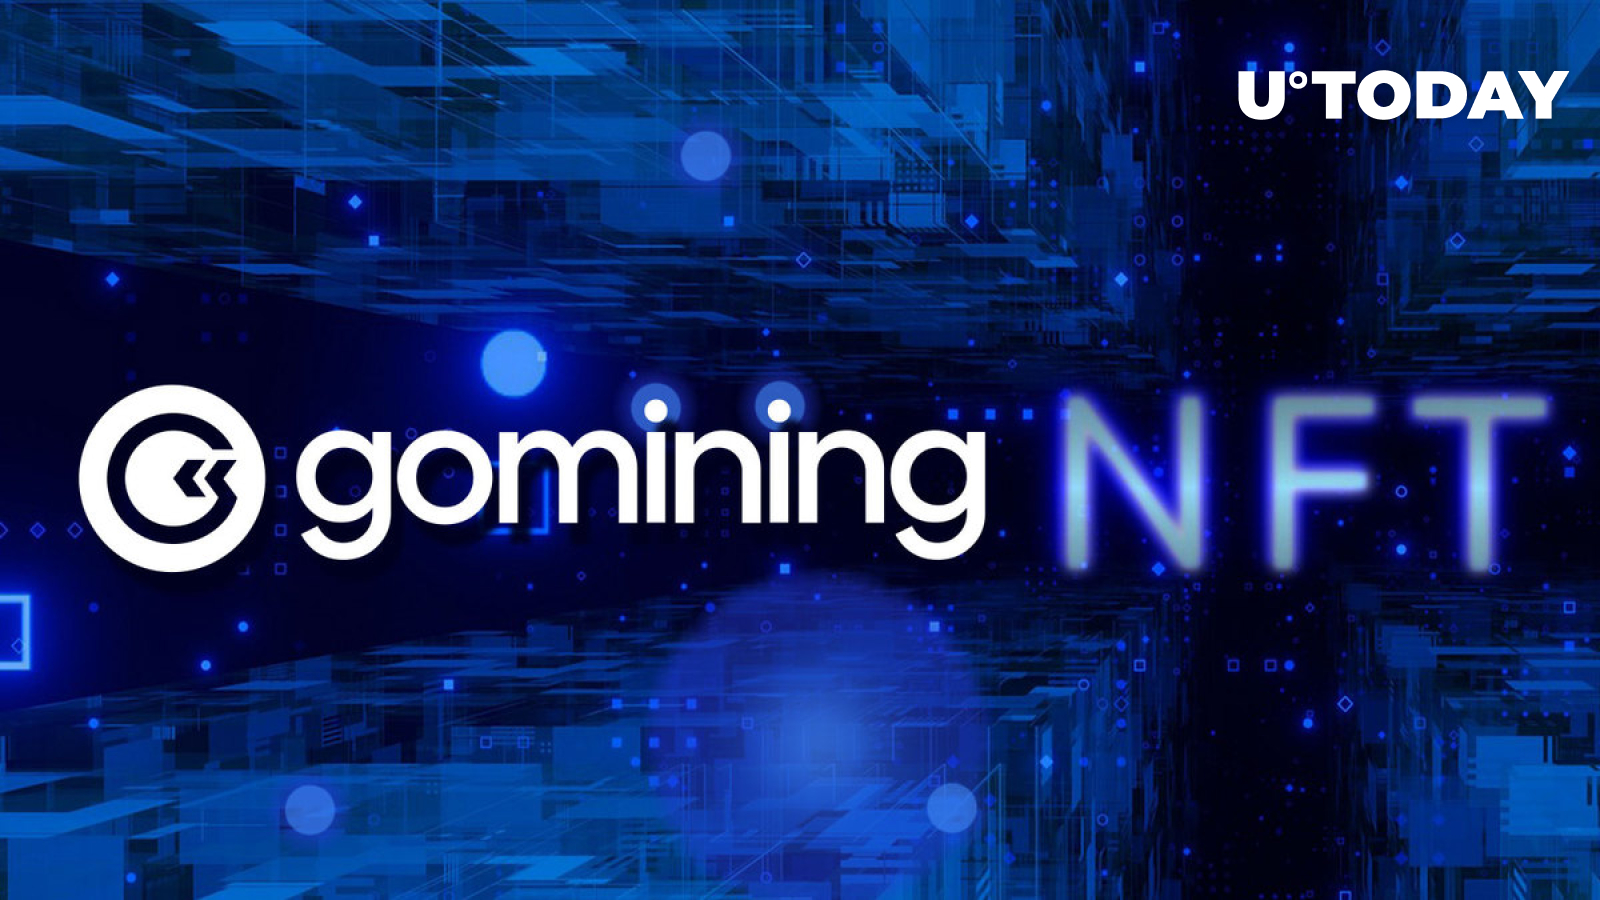 GoMining marks two-year anniversary with rebranding, continues to offer decentralized staking and NFT mining opportunities